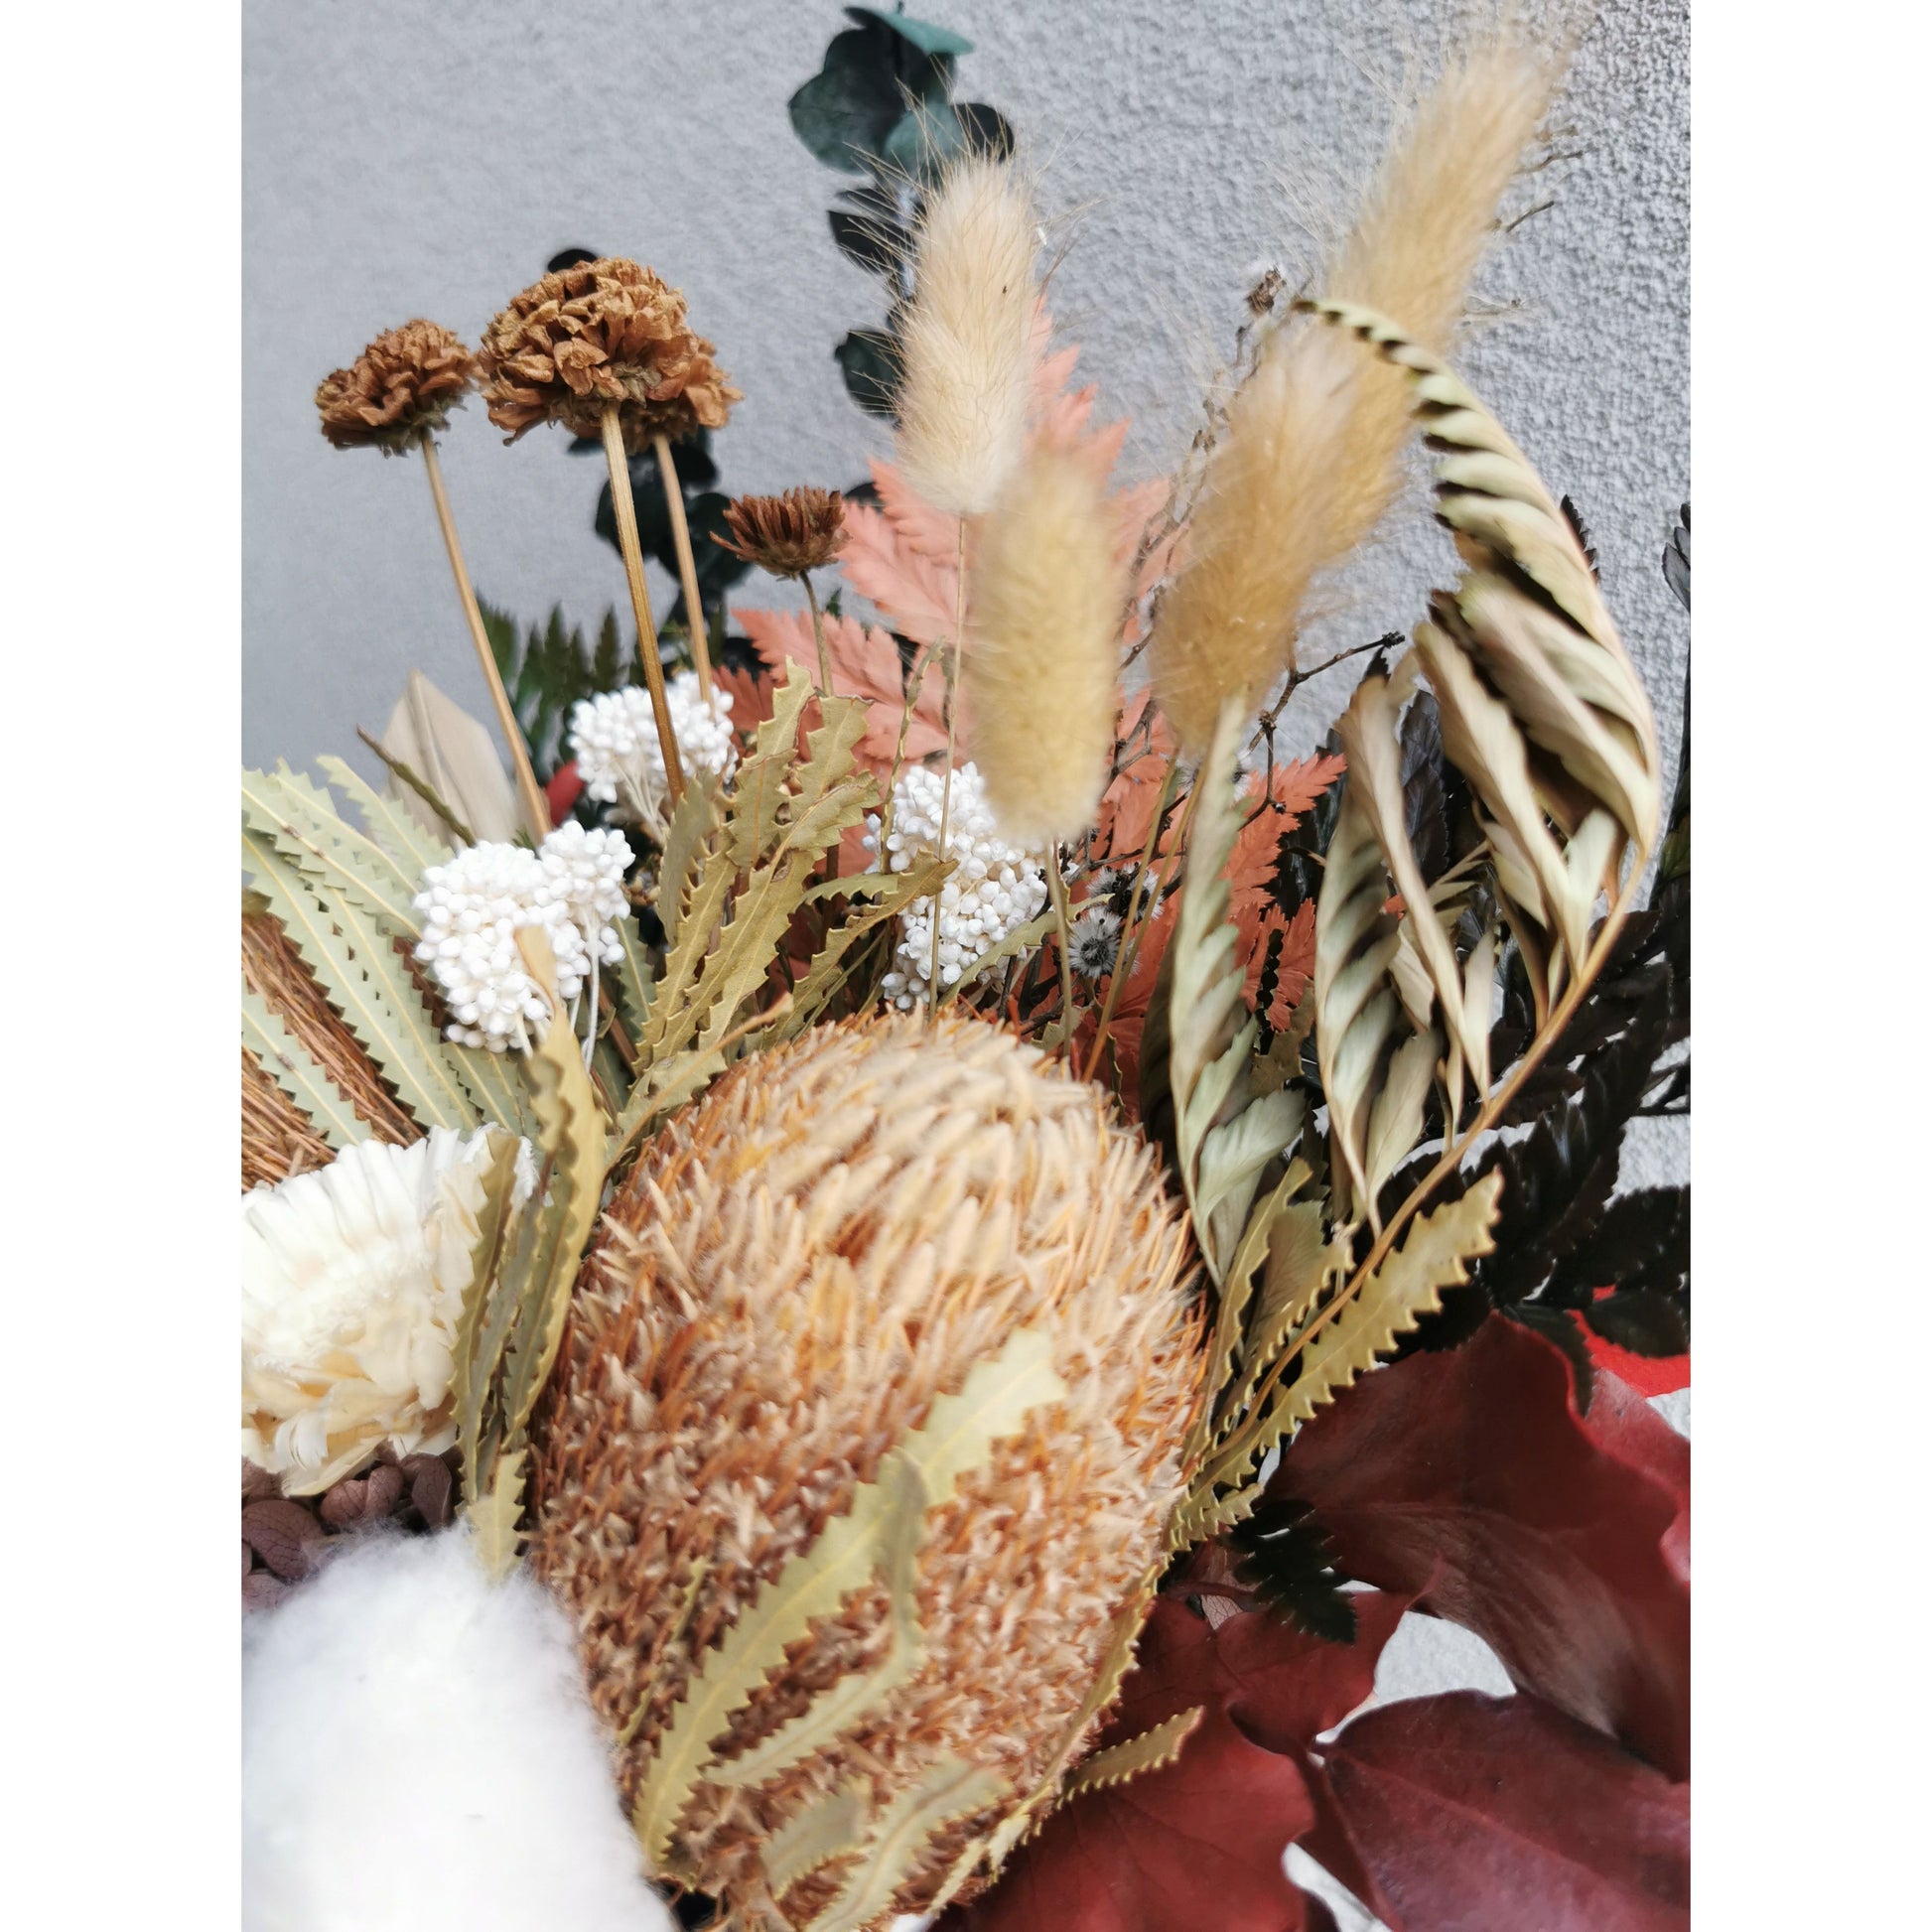 Dried & Preserved native flower arrangement in browns, greens, neutral colours and comes in a white pot including banksias, ferns & bunny tails to name a few. Photo shows a zoomed in close up of the flowers